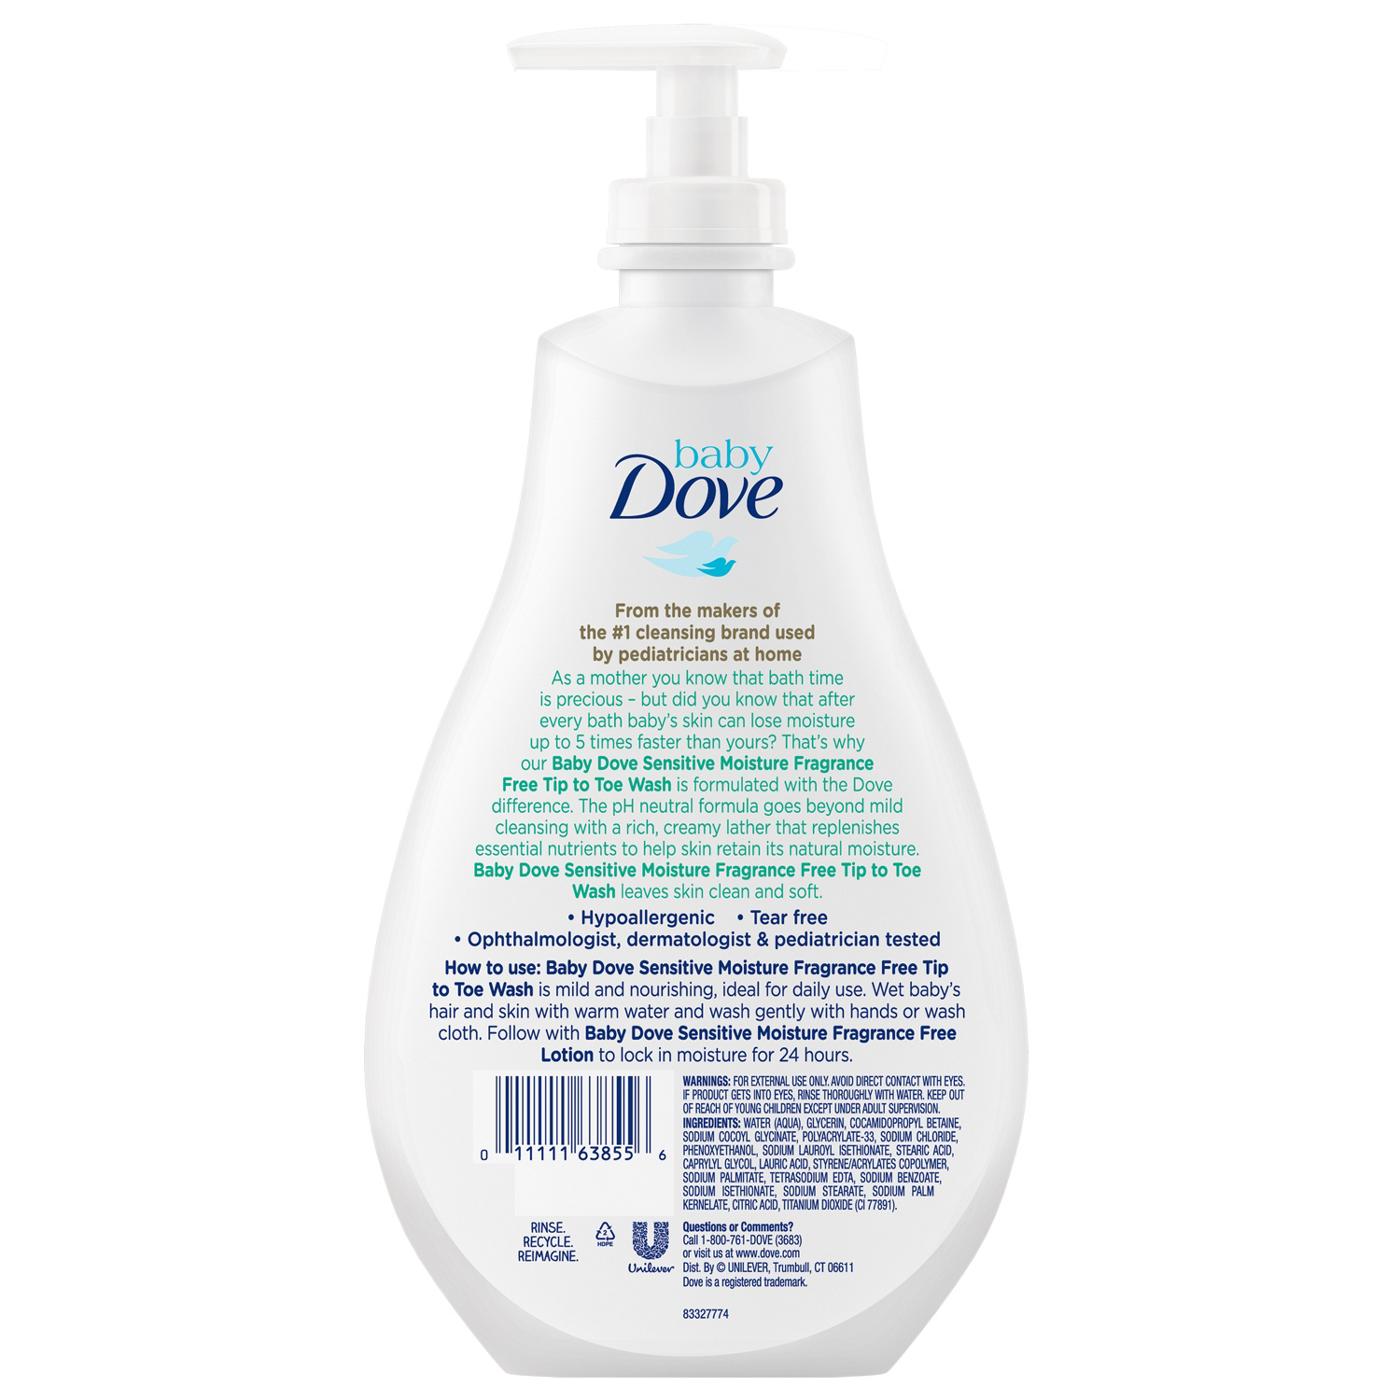 Baby Dove Sensitive Moisture Tip to Toe Baby Wash; image 2 of 2